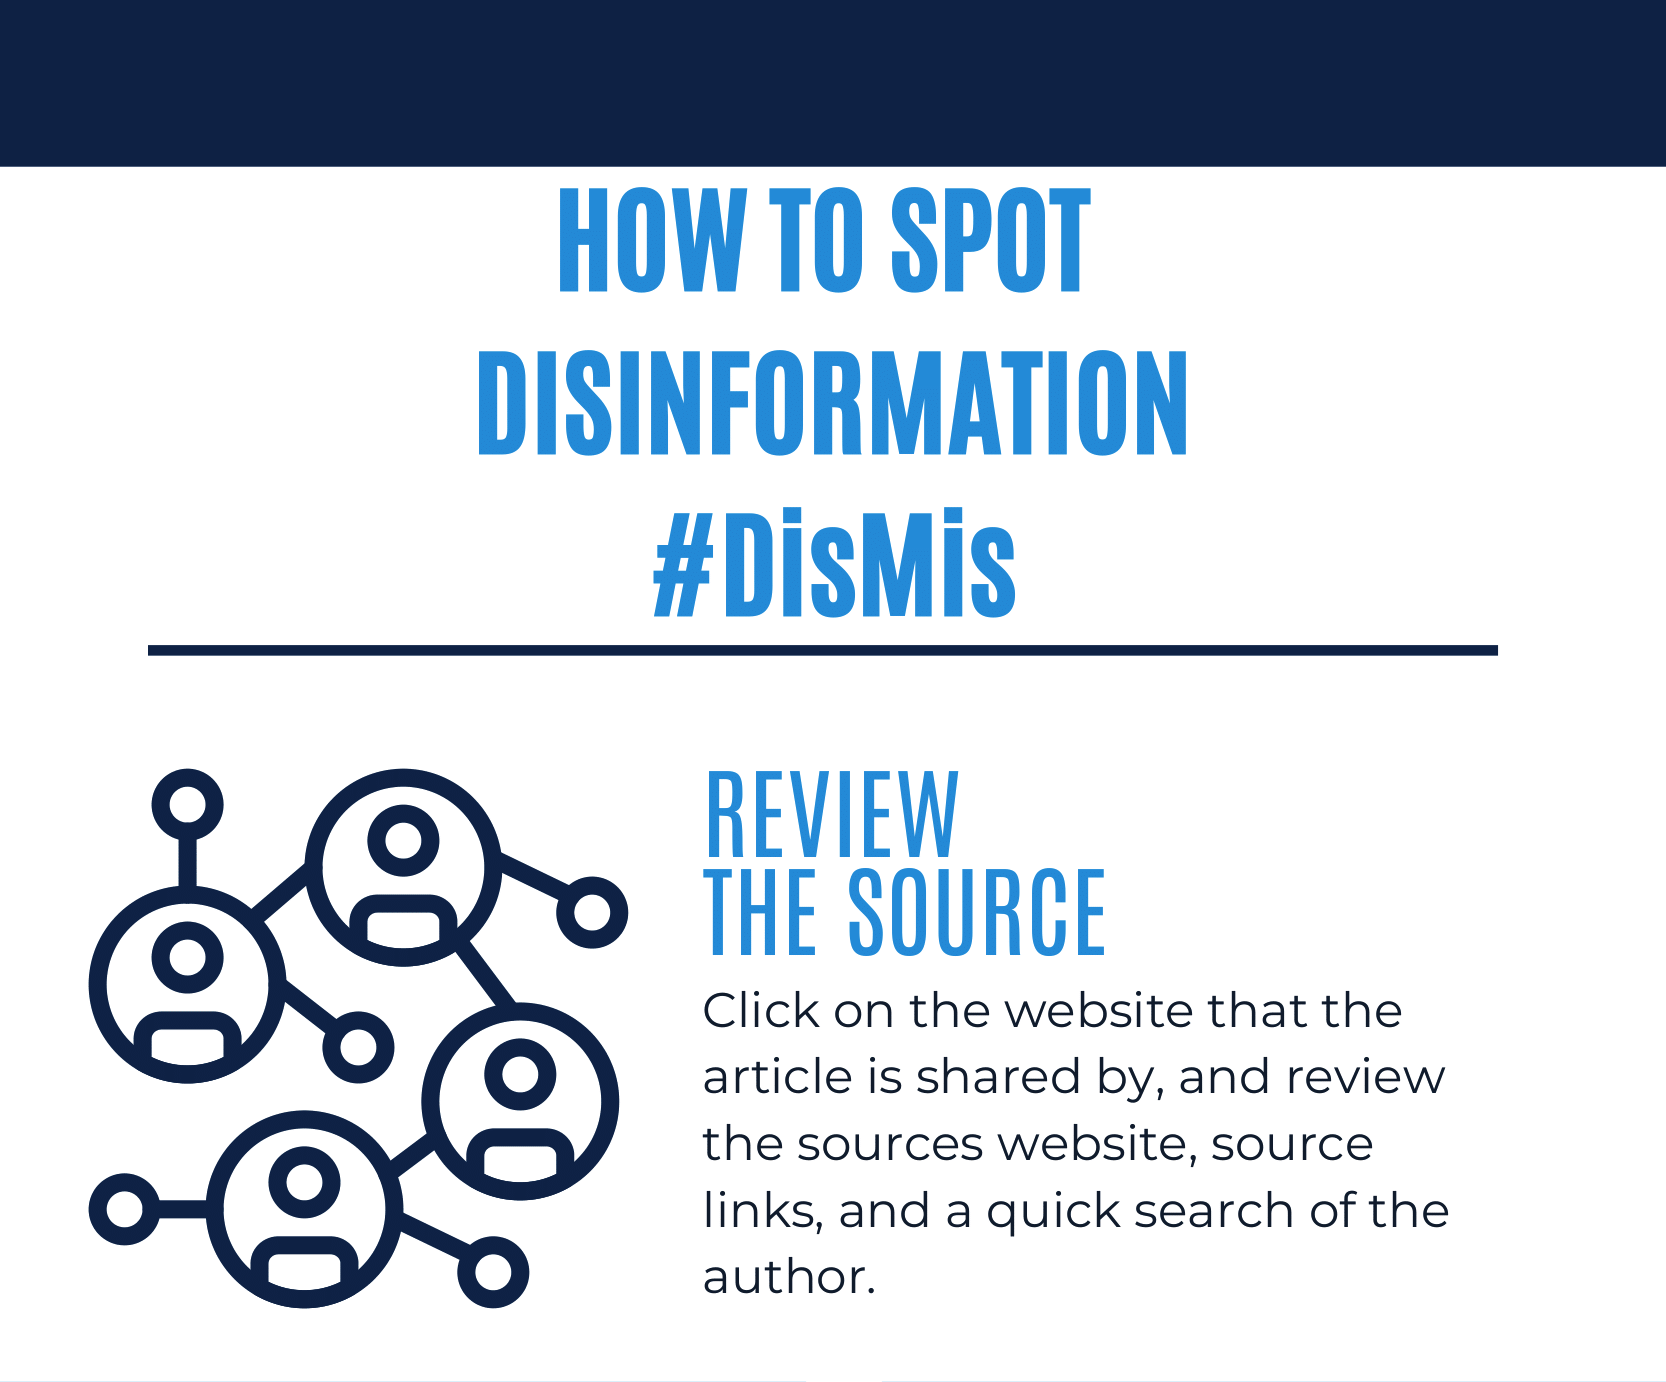 How to spot disinformation #DisMis - Review the Source: Click on the website that the article is shared by, and review the sources website, source links and a quick search of the author.